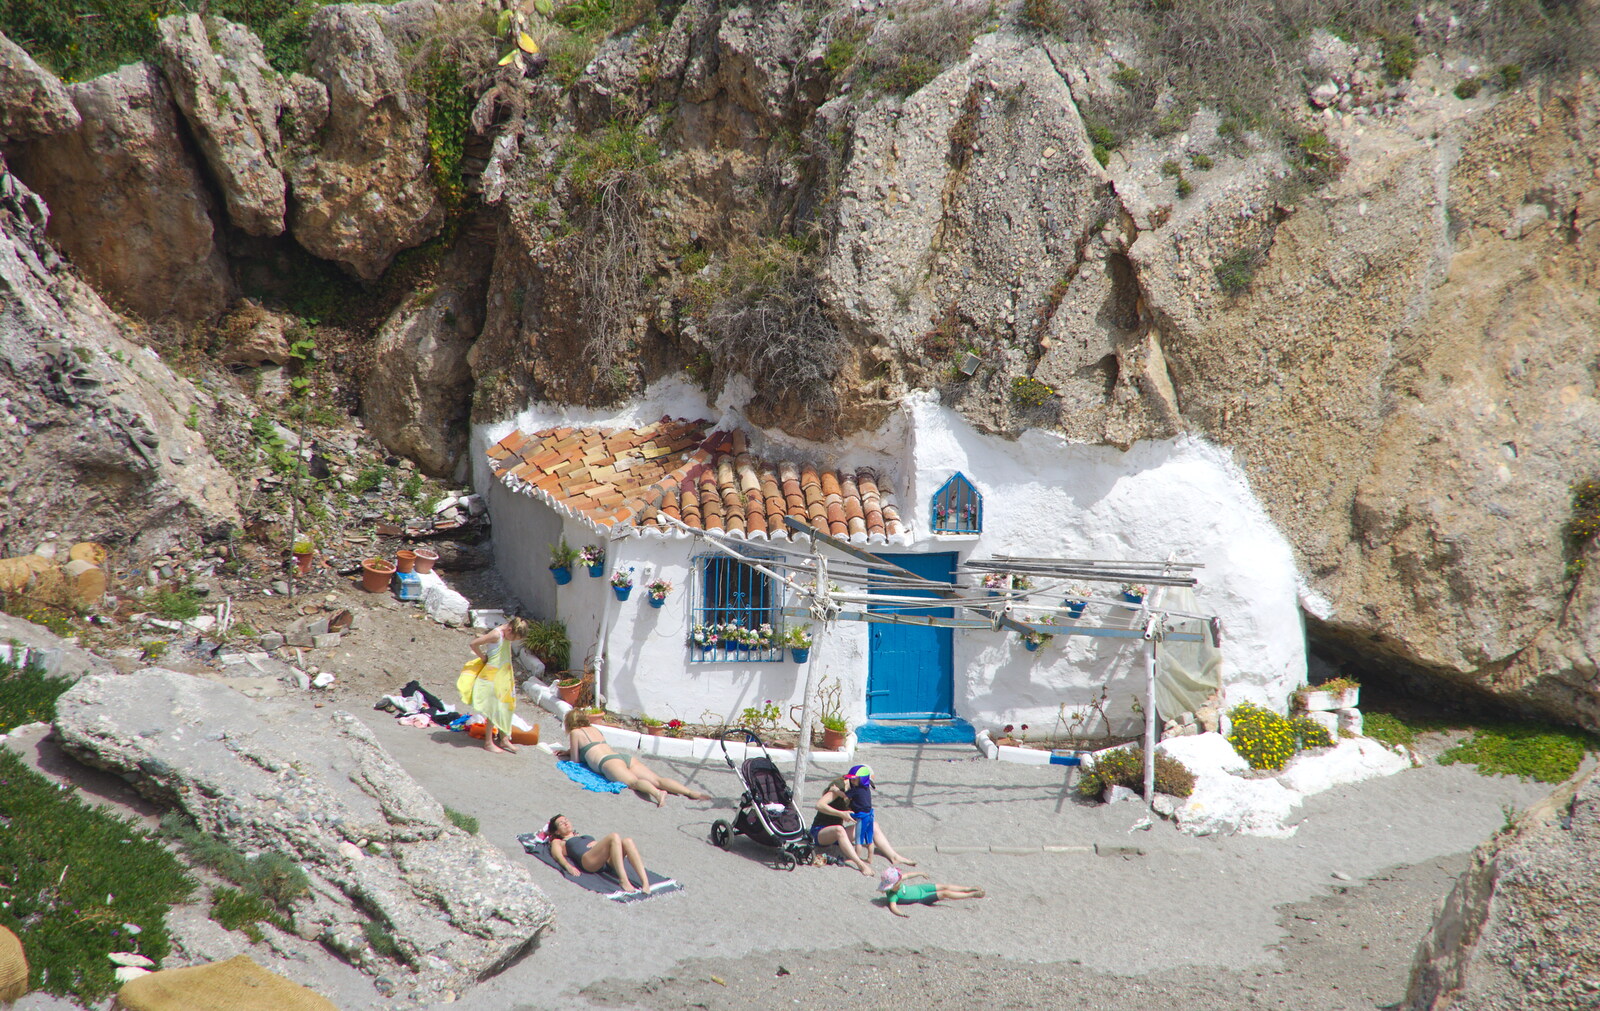 There's a house growing out of the cliff from Torrecilla Beach and the Nerja Museum, Andalusia, Spain - 17th April 2019